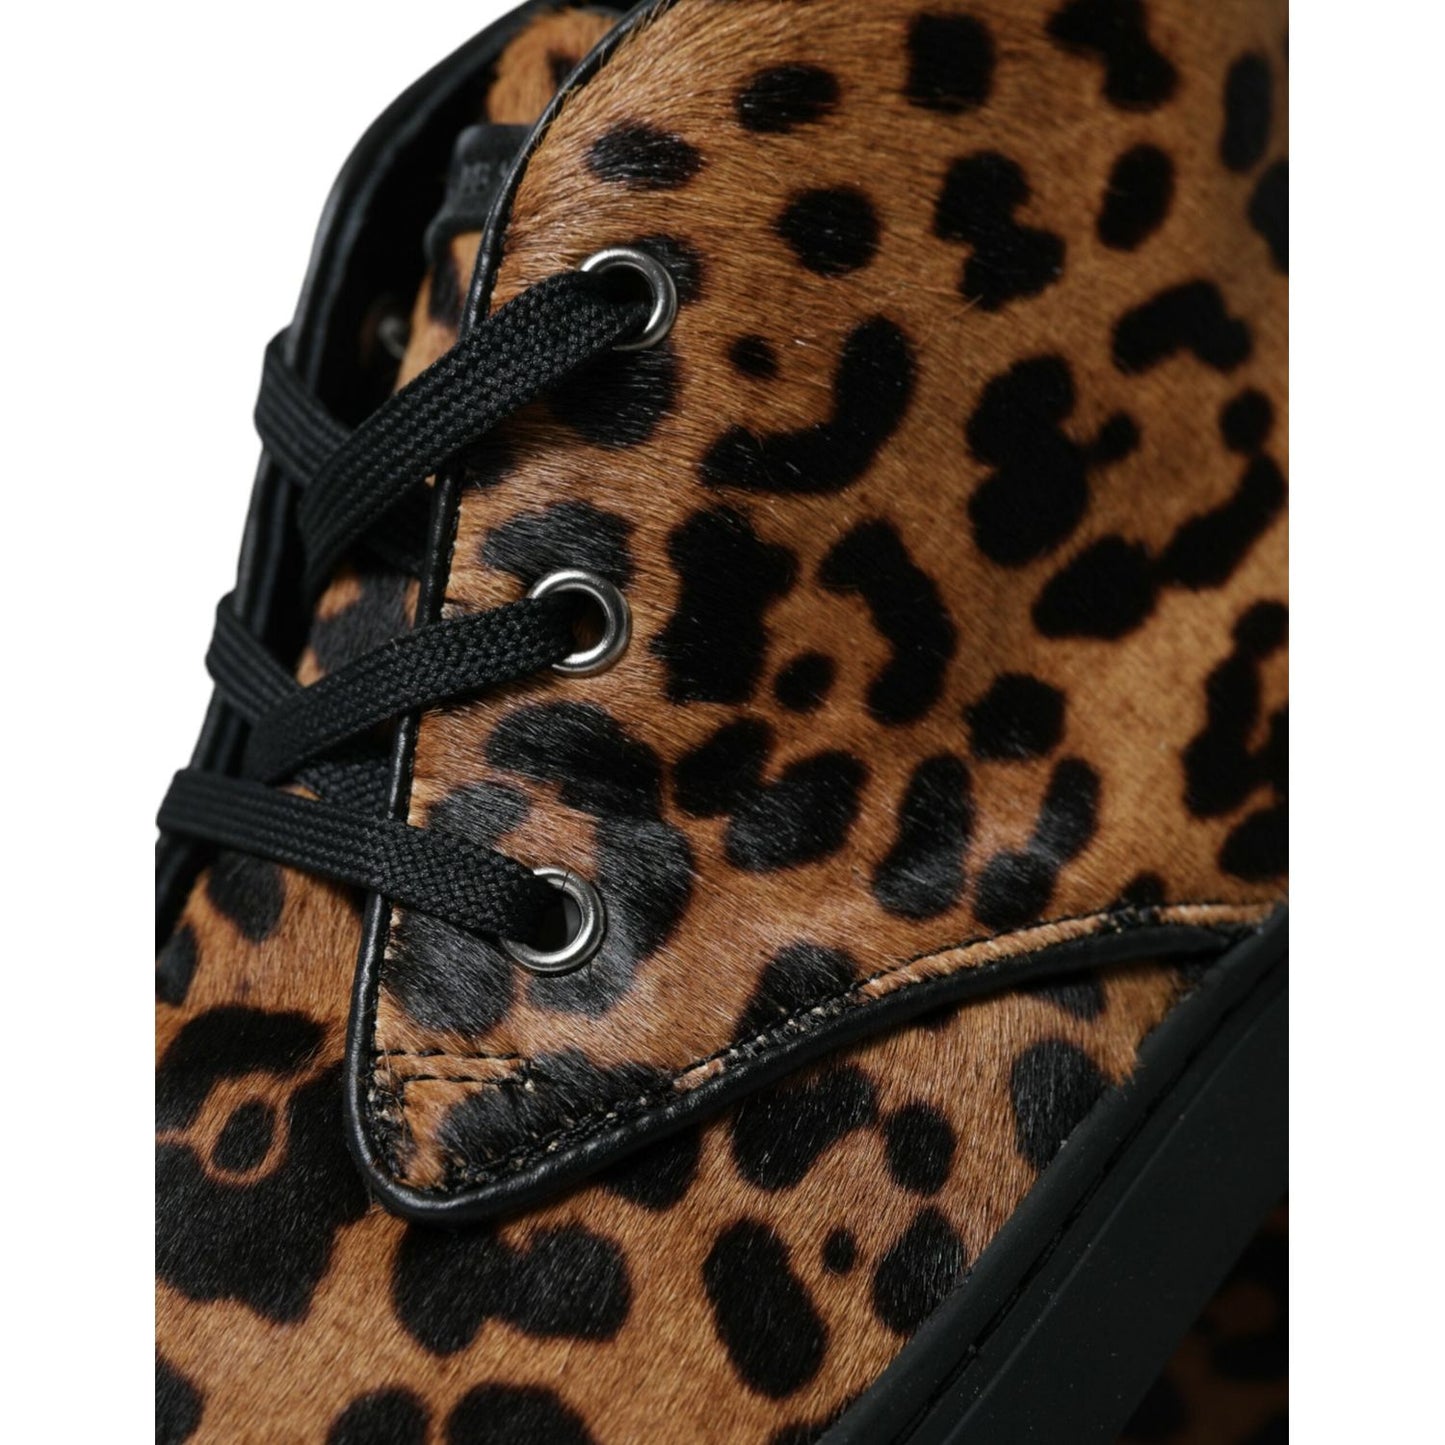 Dolce & Gabbana Elegant Leopard Print Mid-Top Sneakers brown-leopard-pony-hair-leather-sneakers-shoes